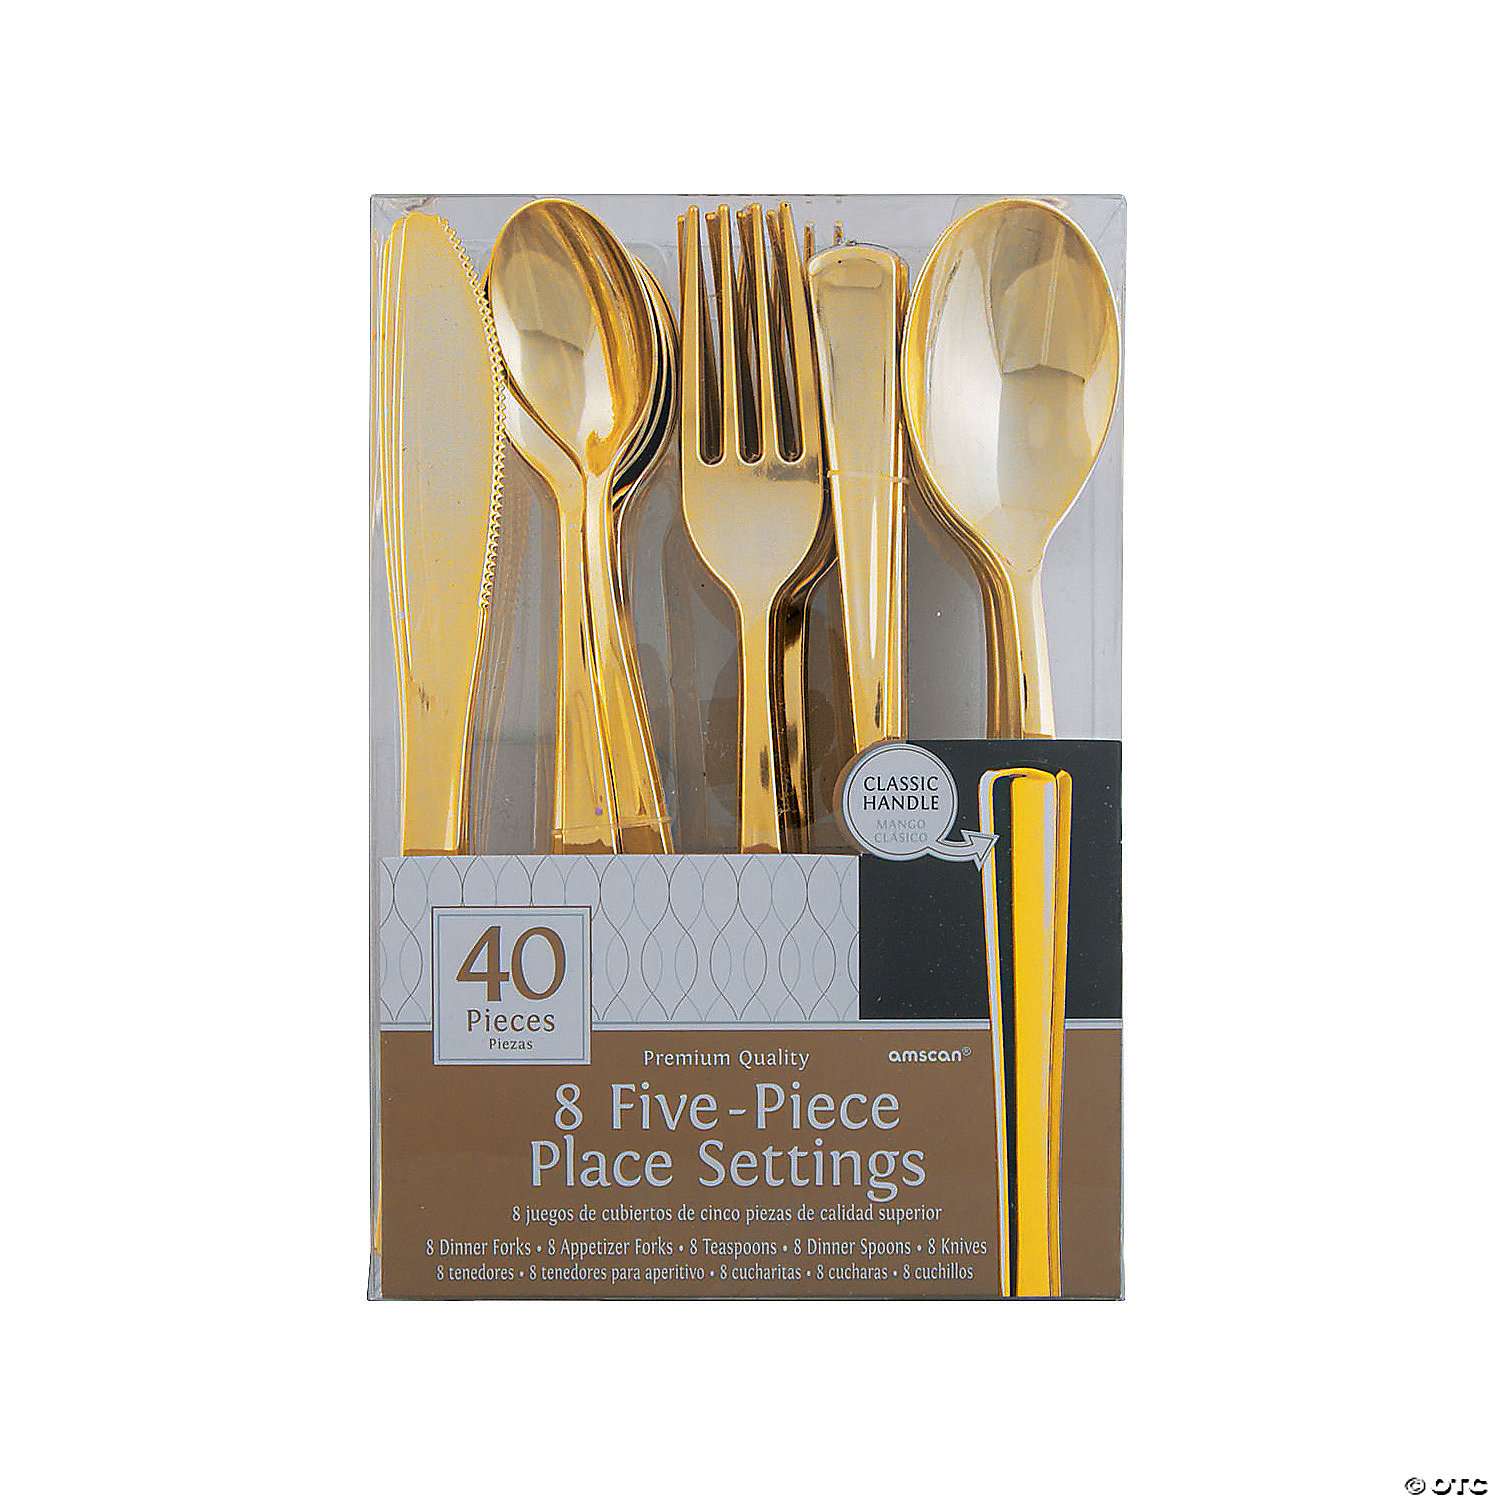 Parties 160 Pack Disposable Silverware Set Weddings and Dailly Use 40 Spoons for Catering 40 Knives Heavy Duty Bulk Flatware Utensils Set Includes 80 Forks Dinners Gold Plastic Cutlery Set 